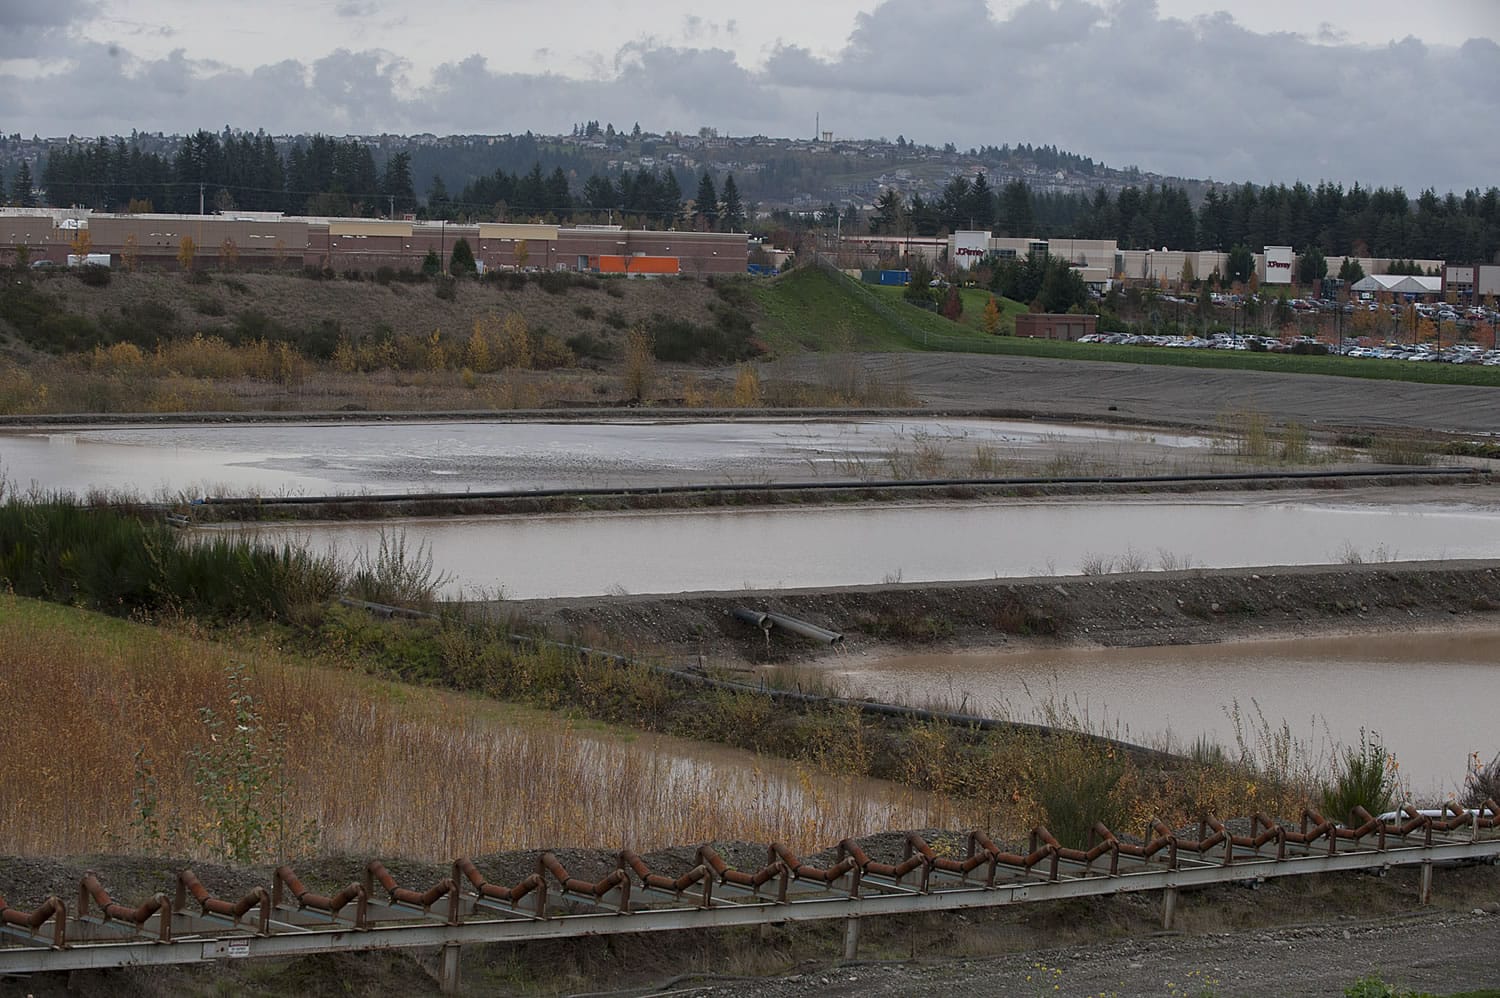 Pac Trust is acquiring a 51-acre rock quarry to expand its 425-acre Columbia Tech Center campus in east Vancouver. Owned by Pacific Rock Products, the quarry faces Southeast First Street and is west of the Home Depot on Souheast 192nd Avaenue.